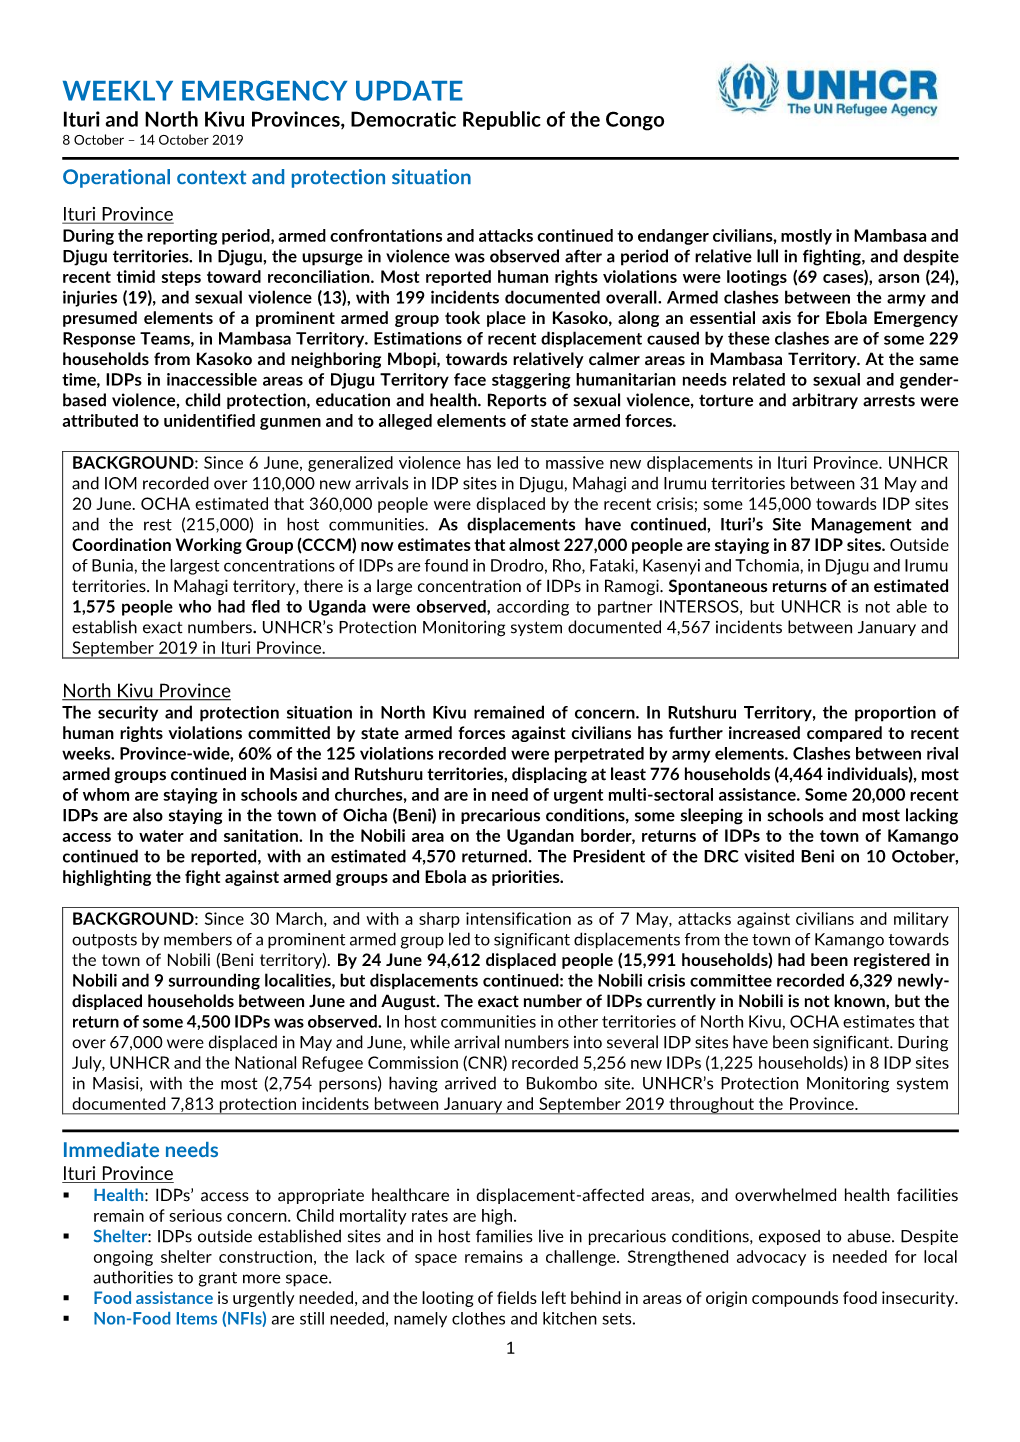 WEEKLY EMERGENCY UPDATE Ituri and North Kivu Provinces, Democratic Republic of the Congo 8 October – 14 October 2019